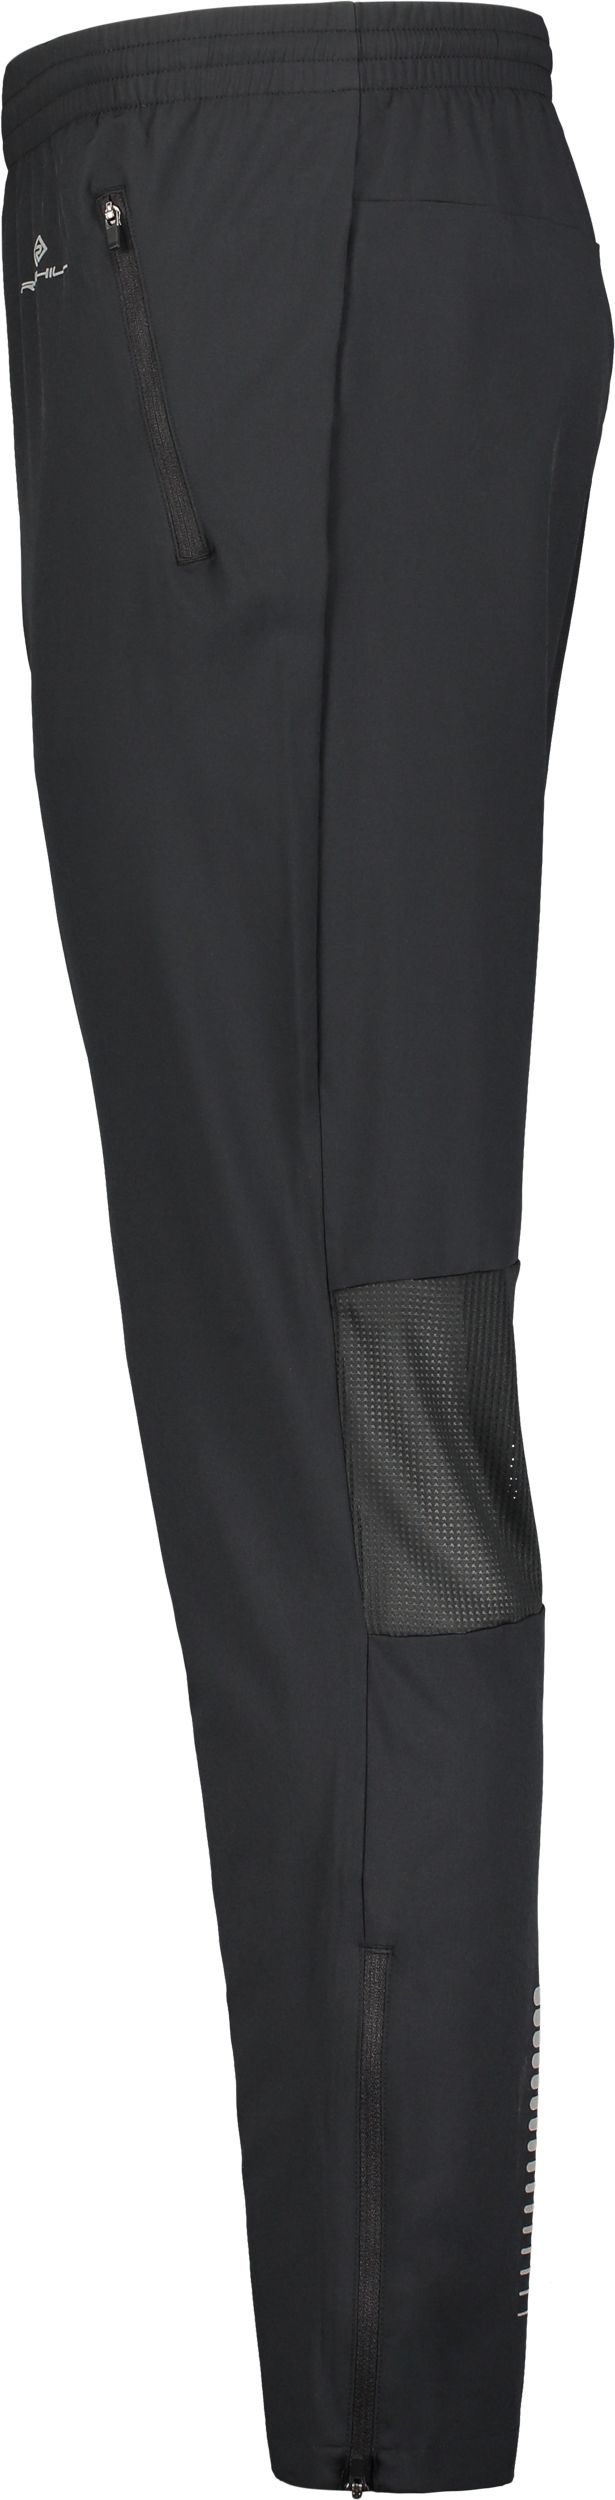 RONHILL, WIND PANT M